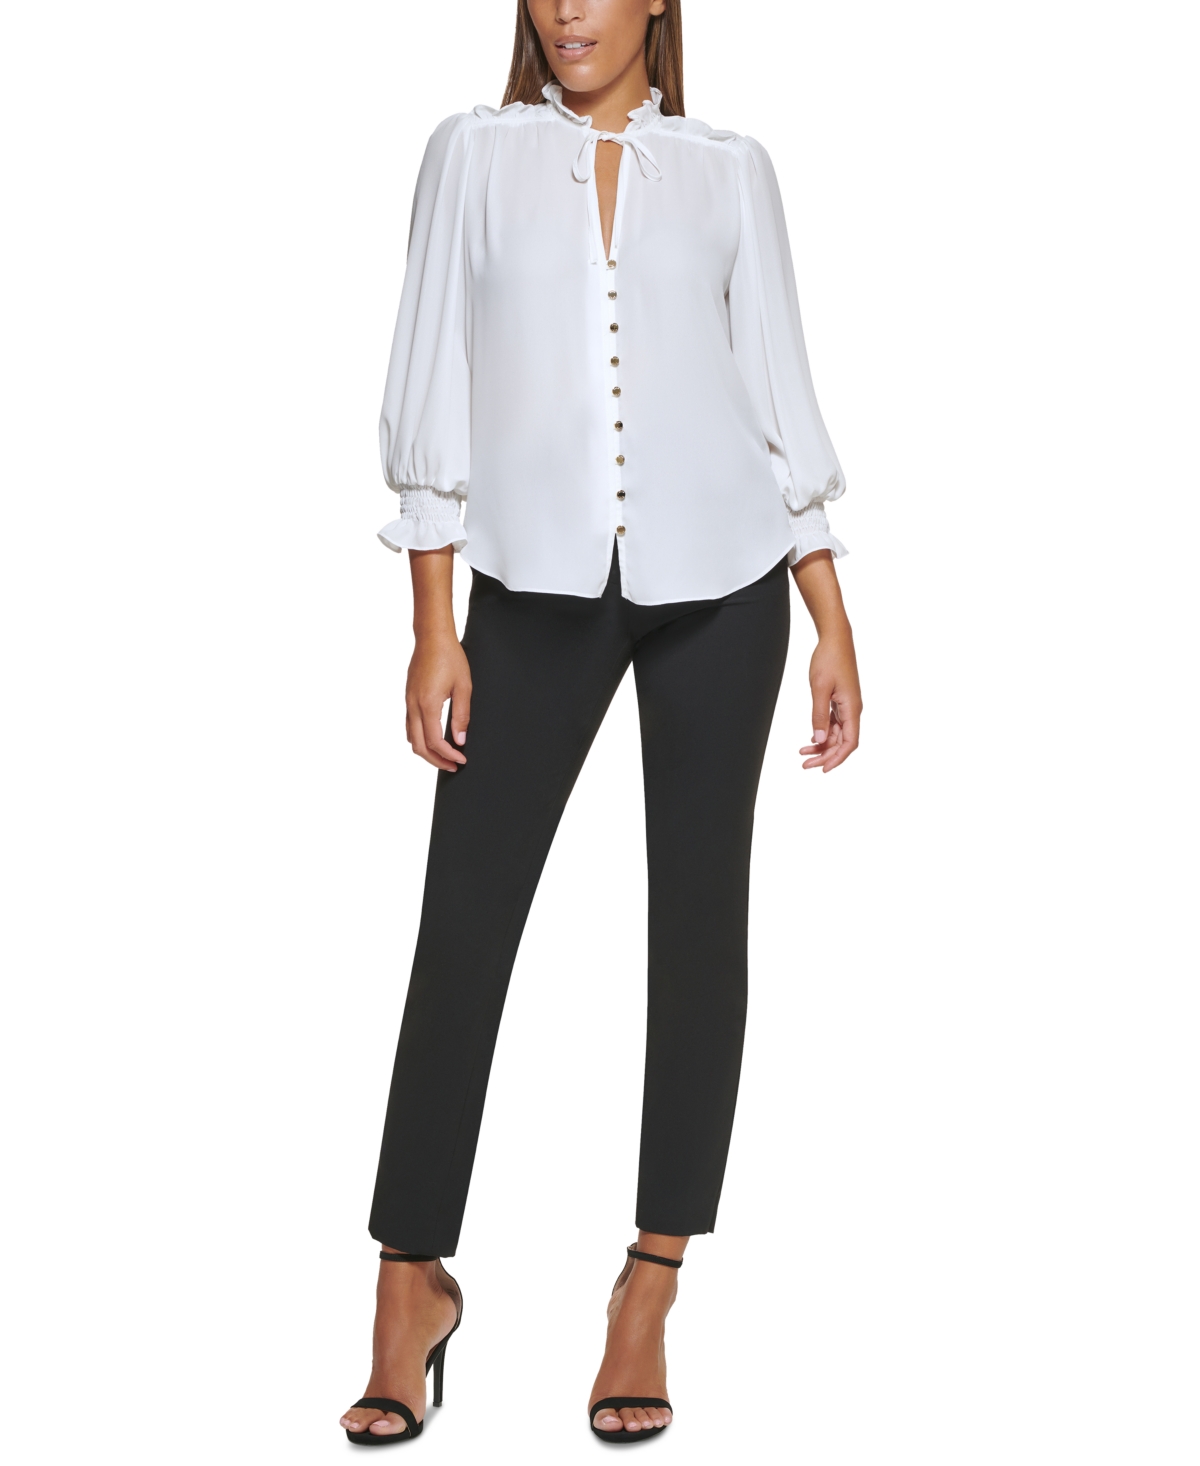 Petite Tie-Neck Button-Front Ruffled Top, Created for Macy's - Linen White